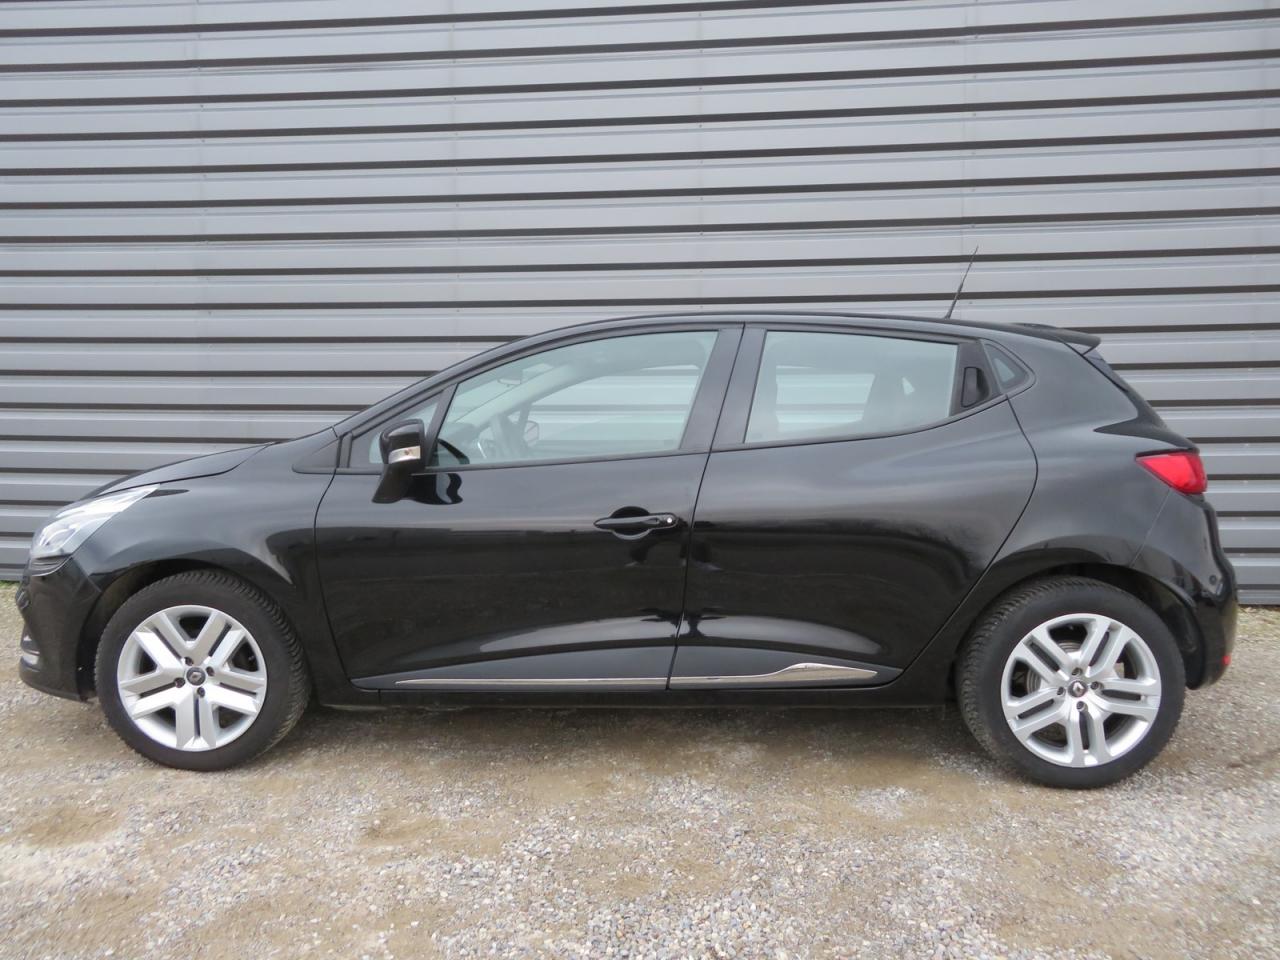 AUTO TRANSACTIONS - RENAULT-CLIO-Clio 0.9 Energy TCe - 90 E6C IV BERLINE  Business PHASE 2